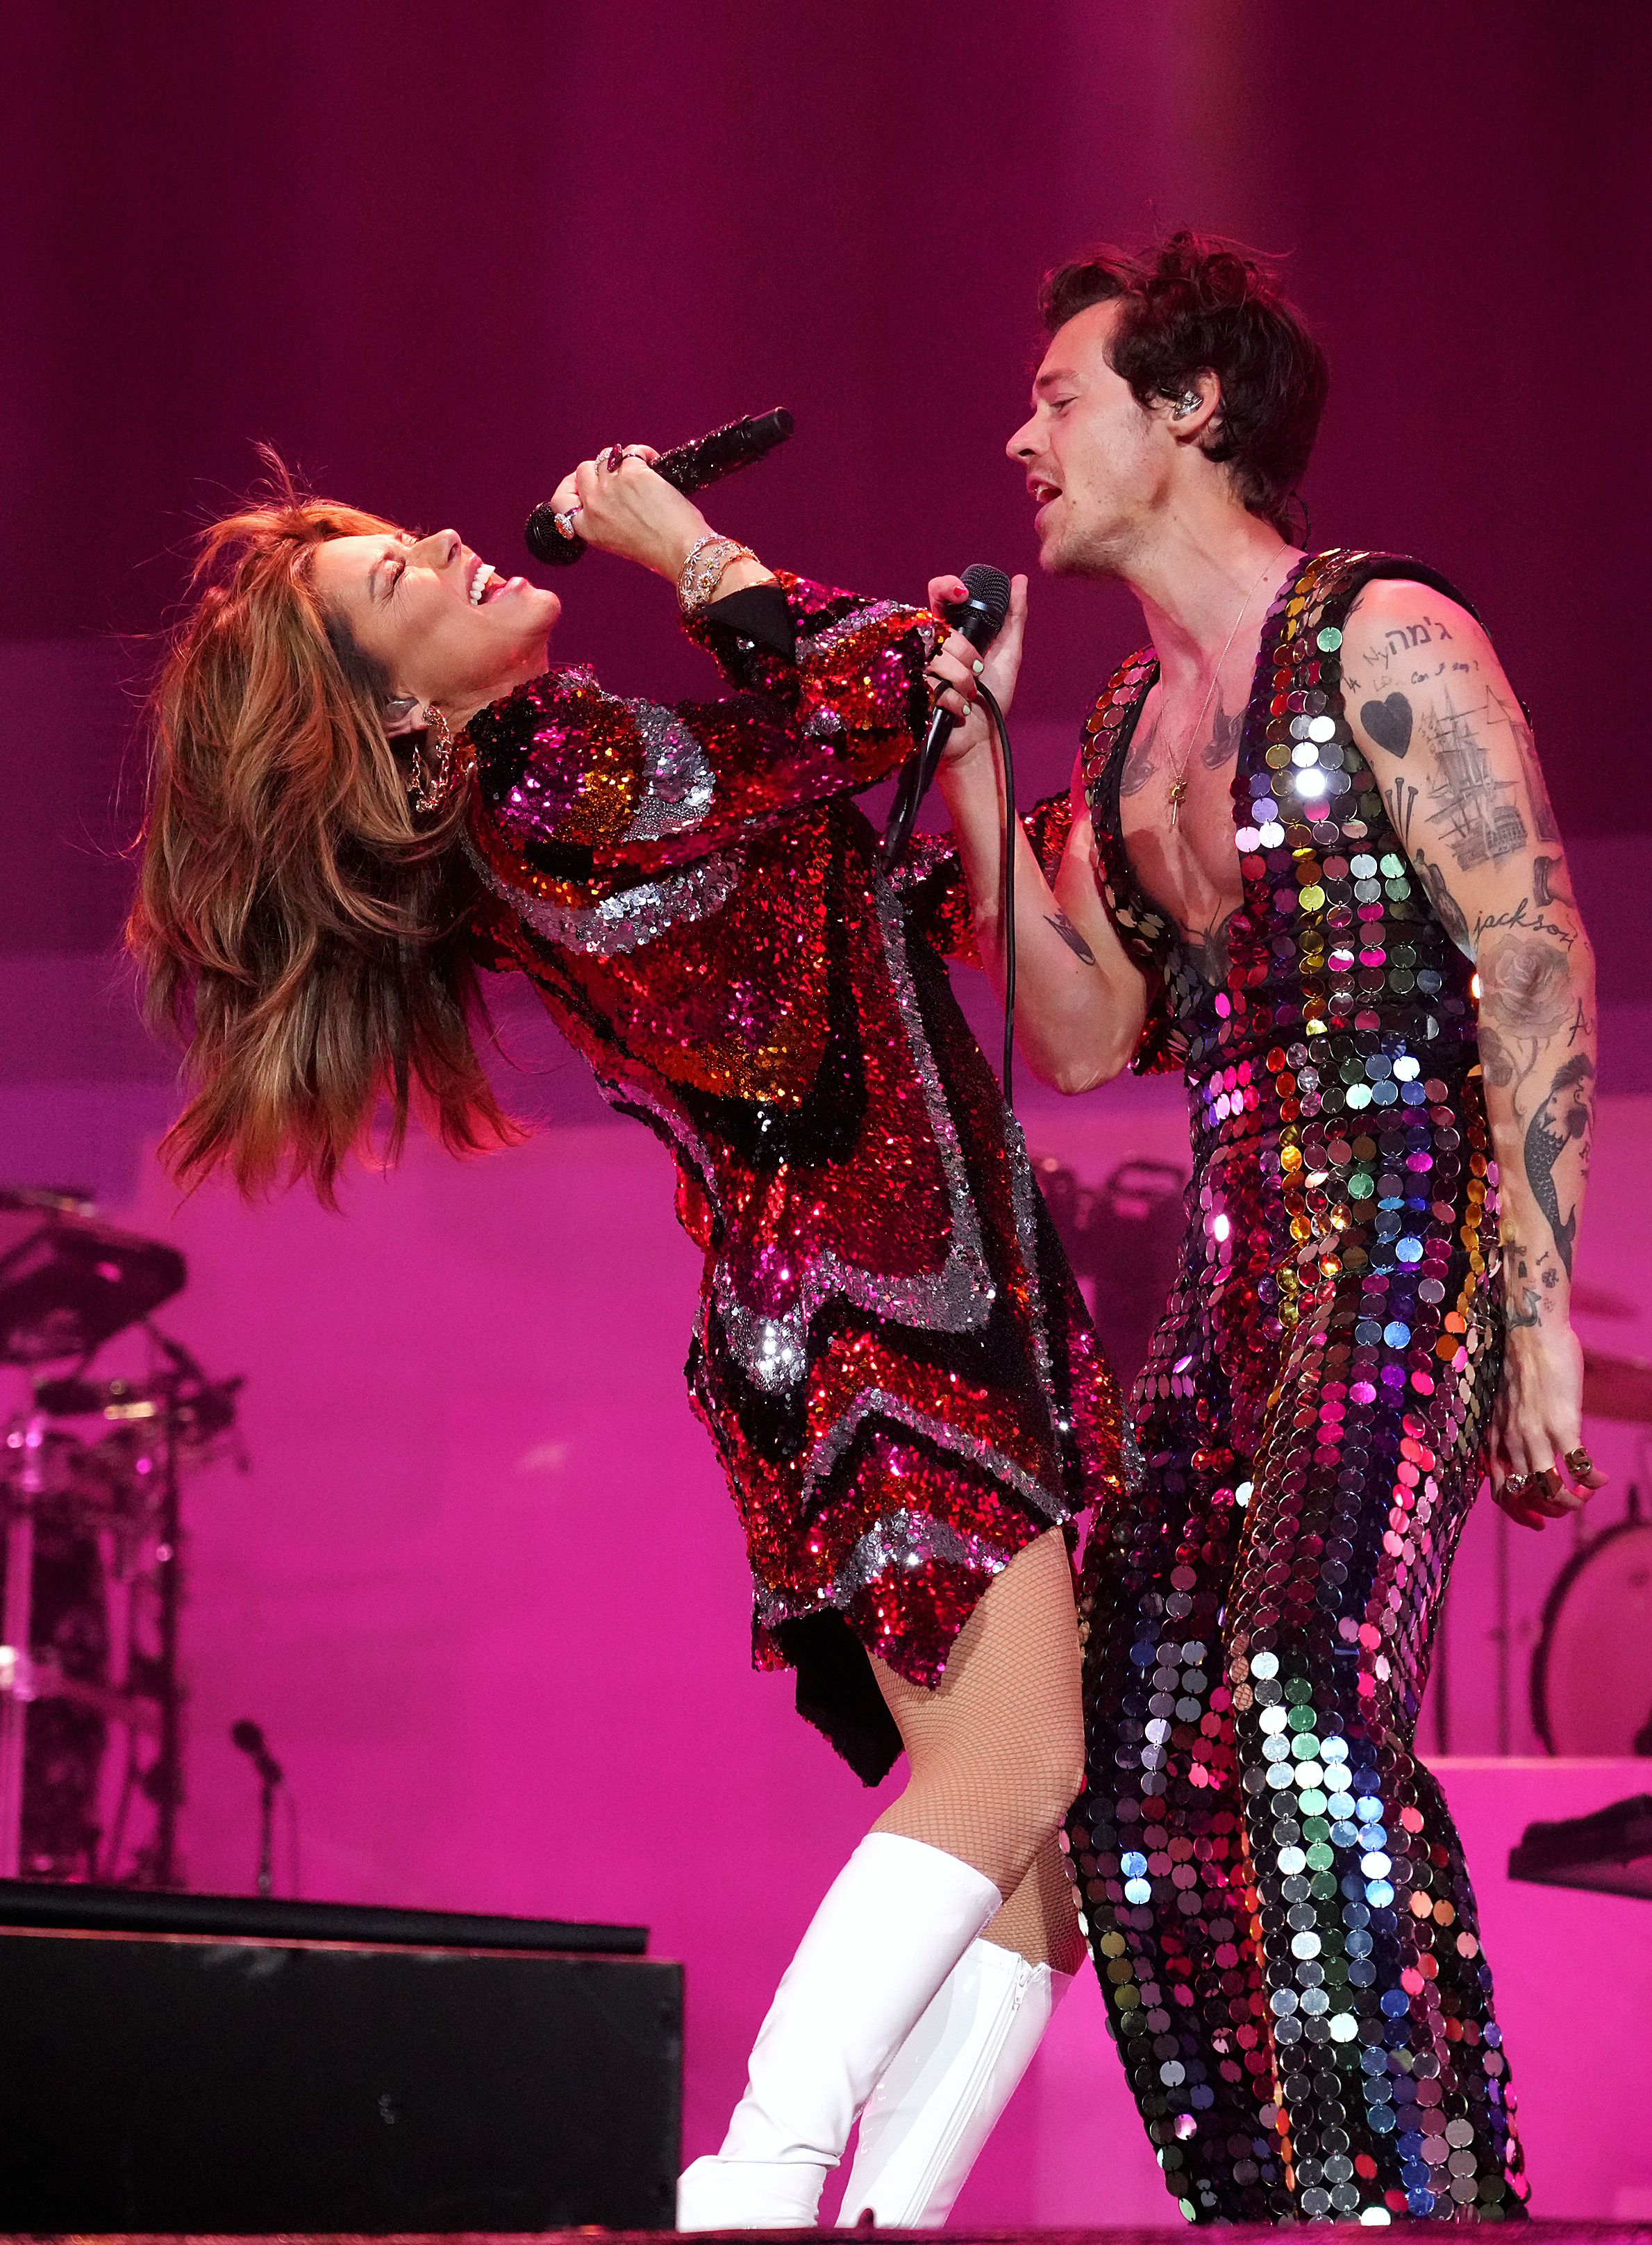 Shania Twain and Harry Styles performed onstage at the Coachella Stage during the 2022 Coachella Valley Music And Arts Festival